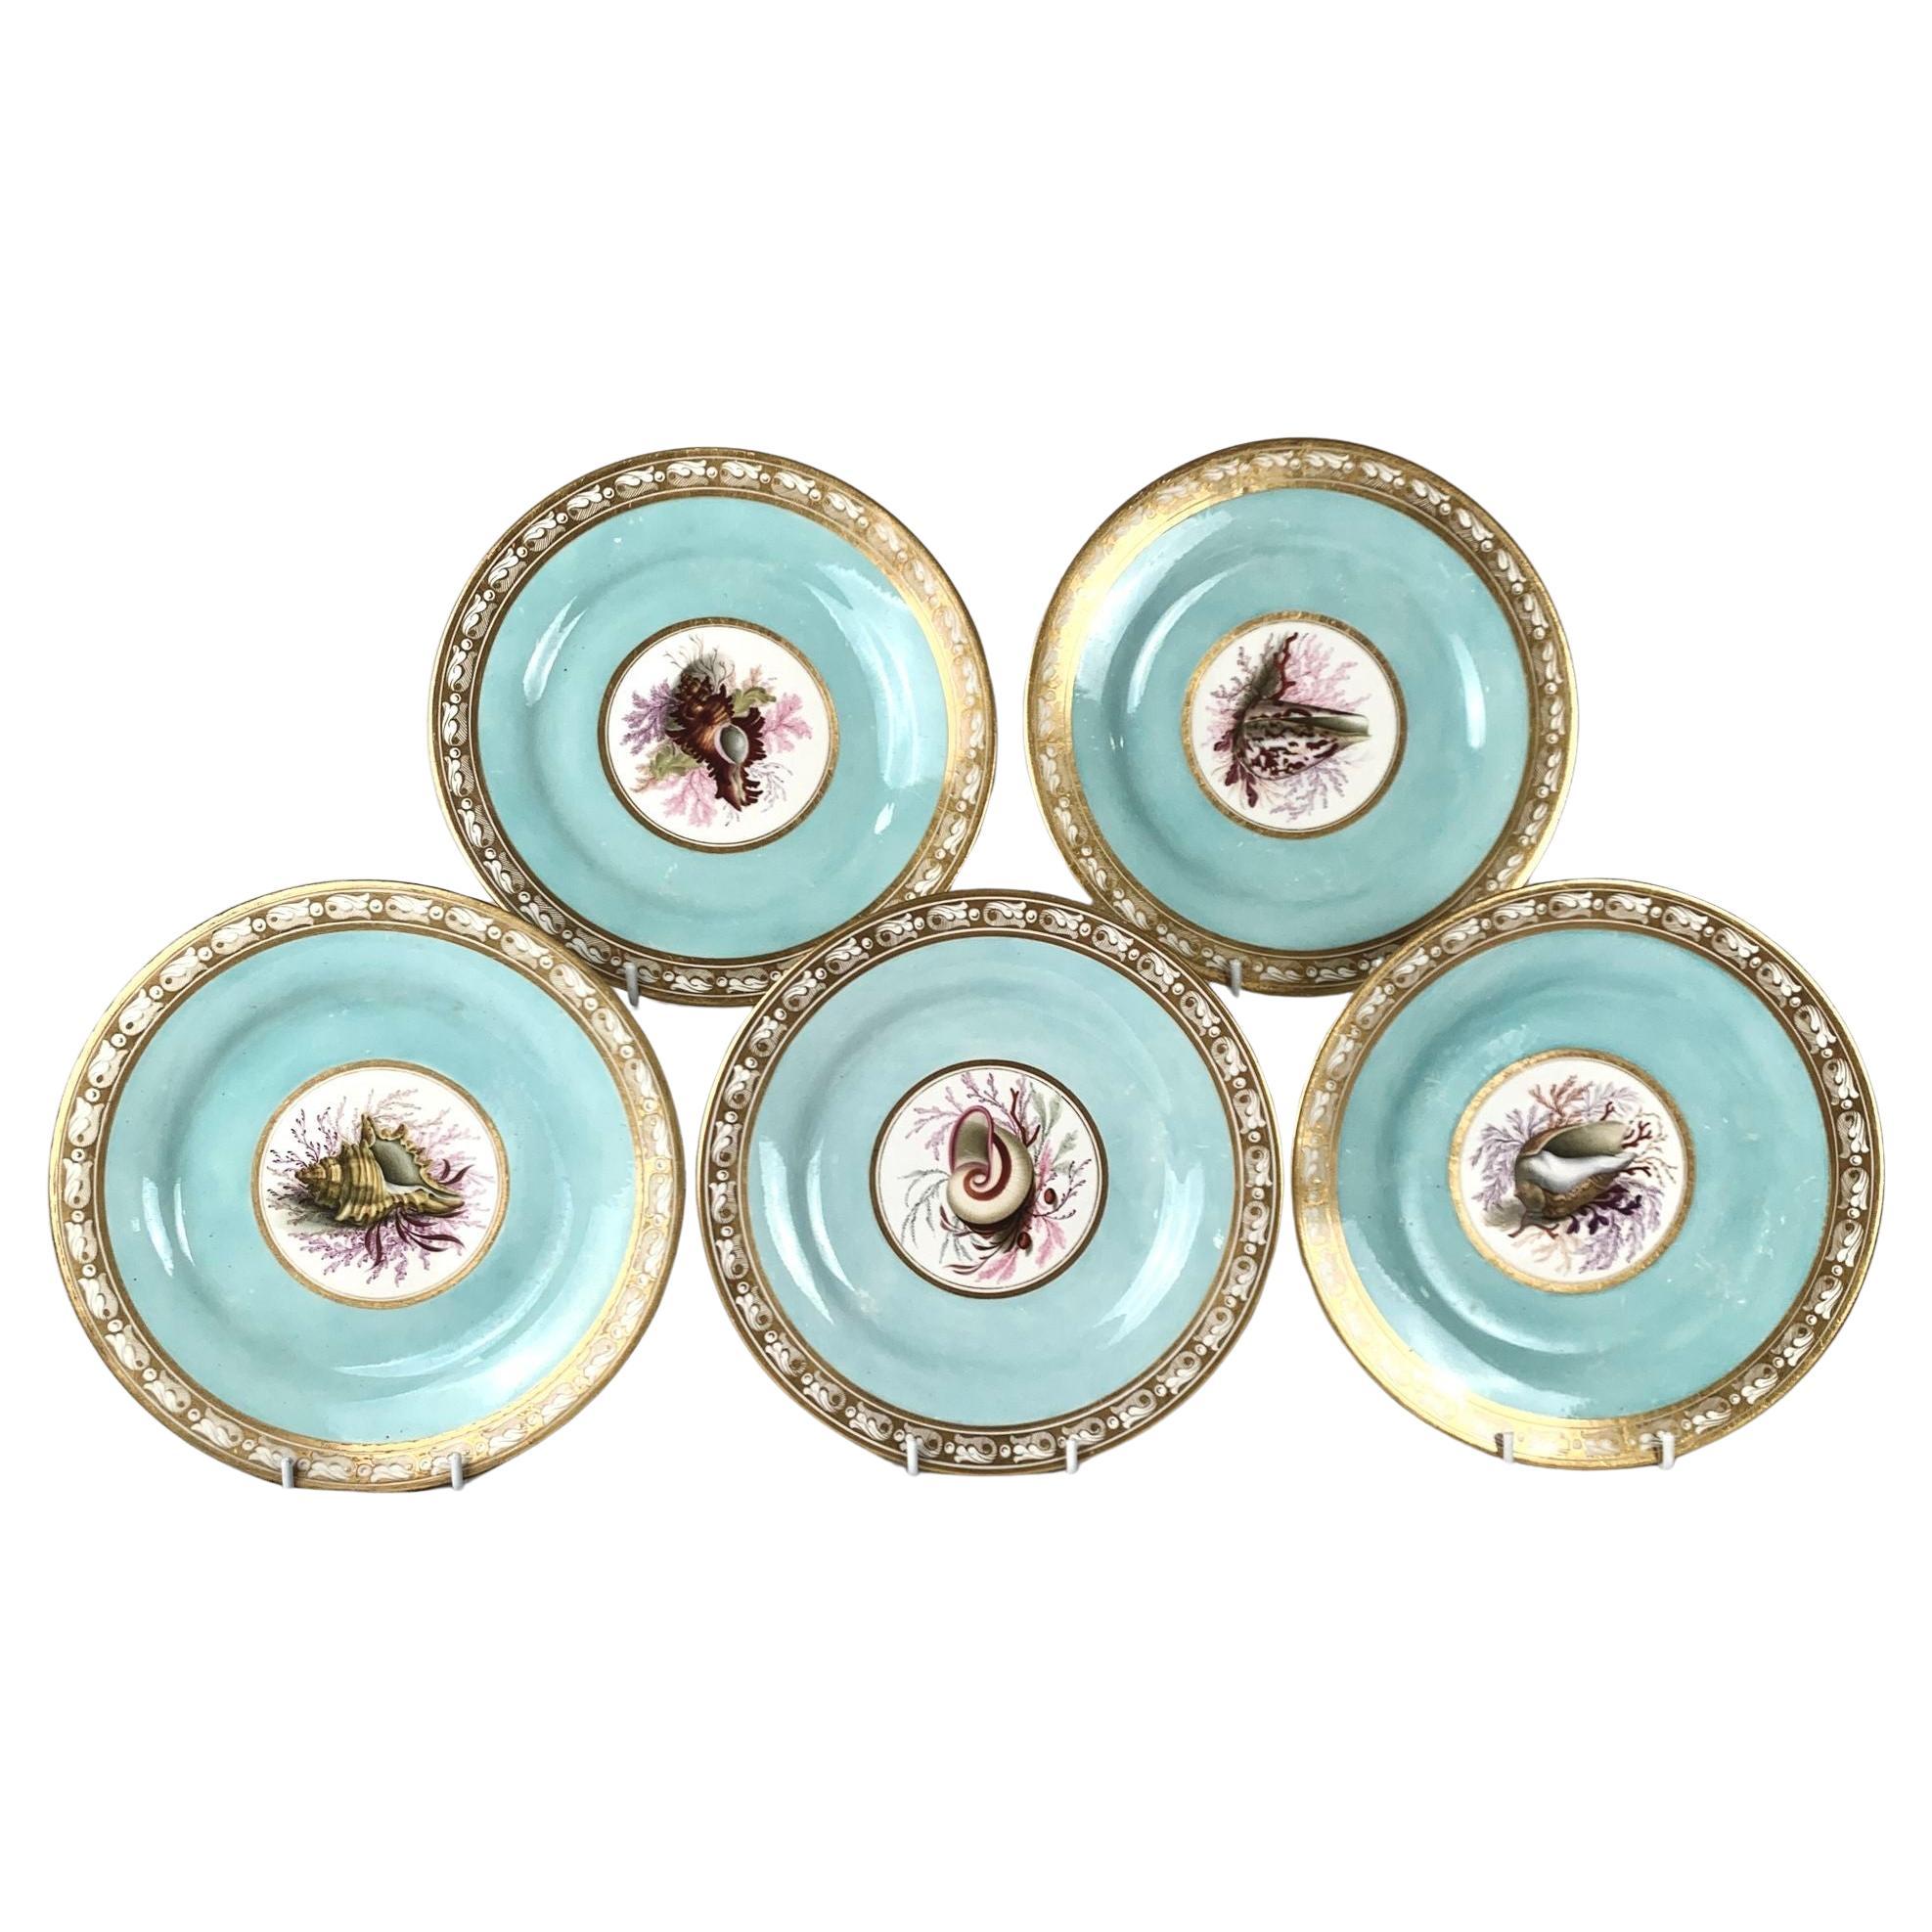 Hand Painted Shell Decorated Worcester Plates Set of 5 Flight Barr Barr C-1820 For Sale